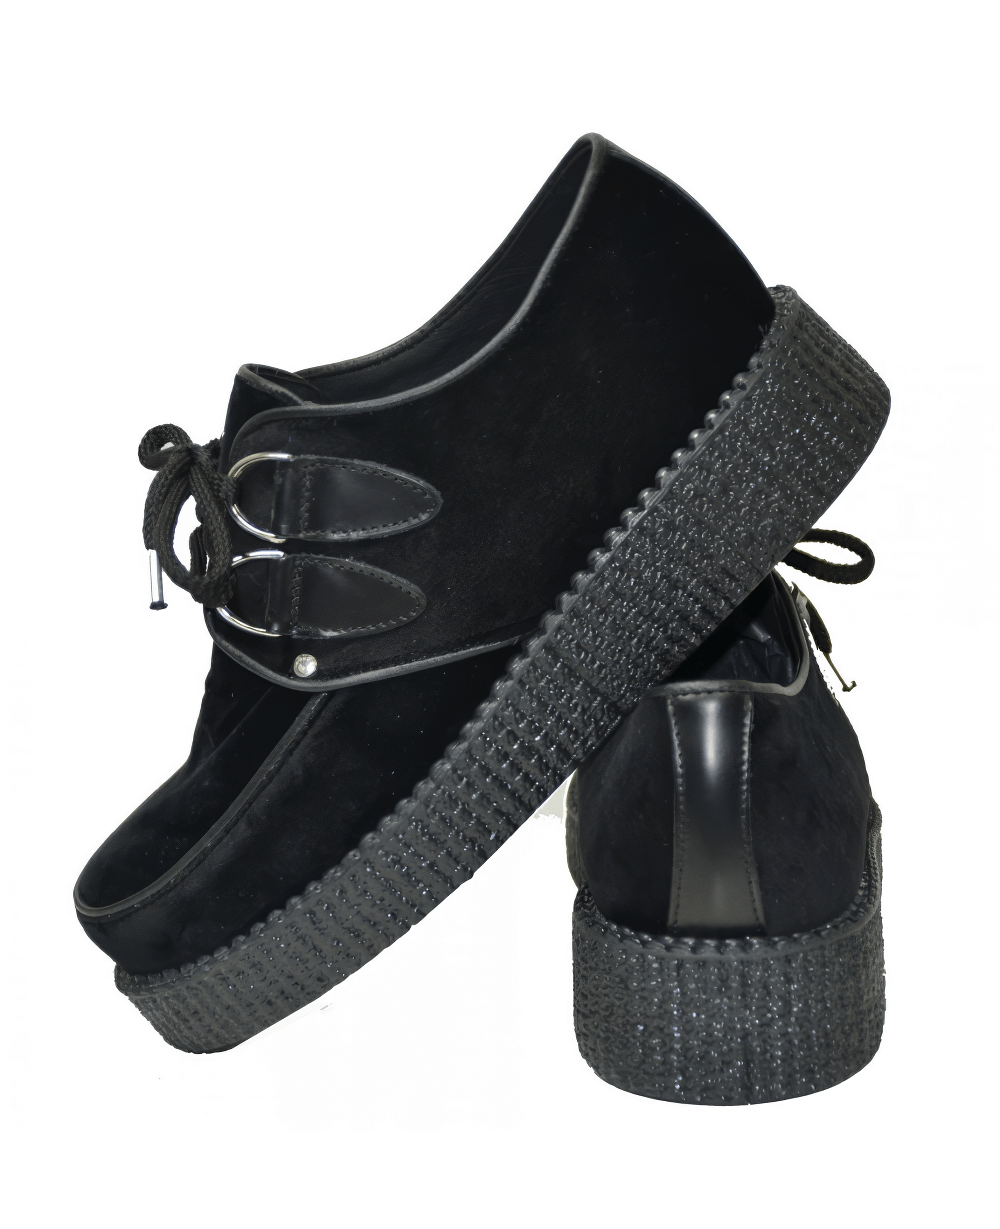 Unisex Velvet Lace-Up Classic Creepers in a Few Colors